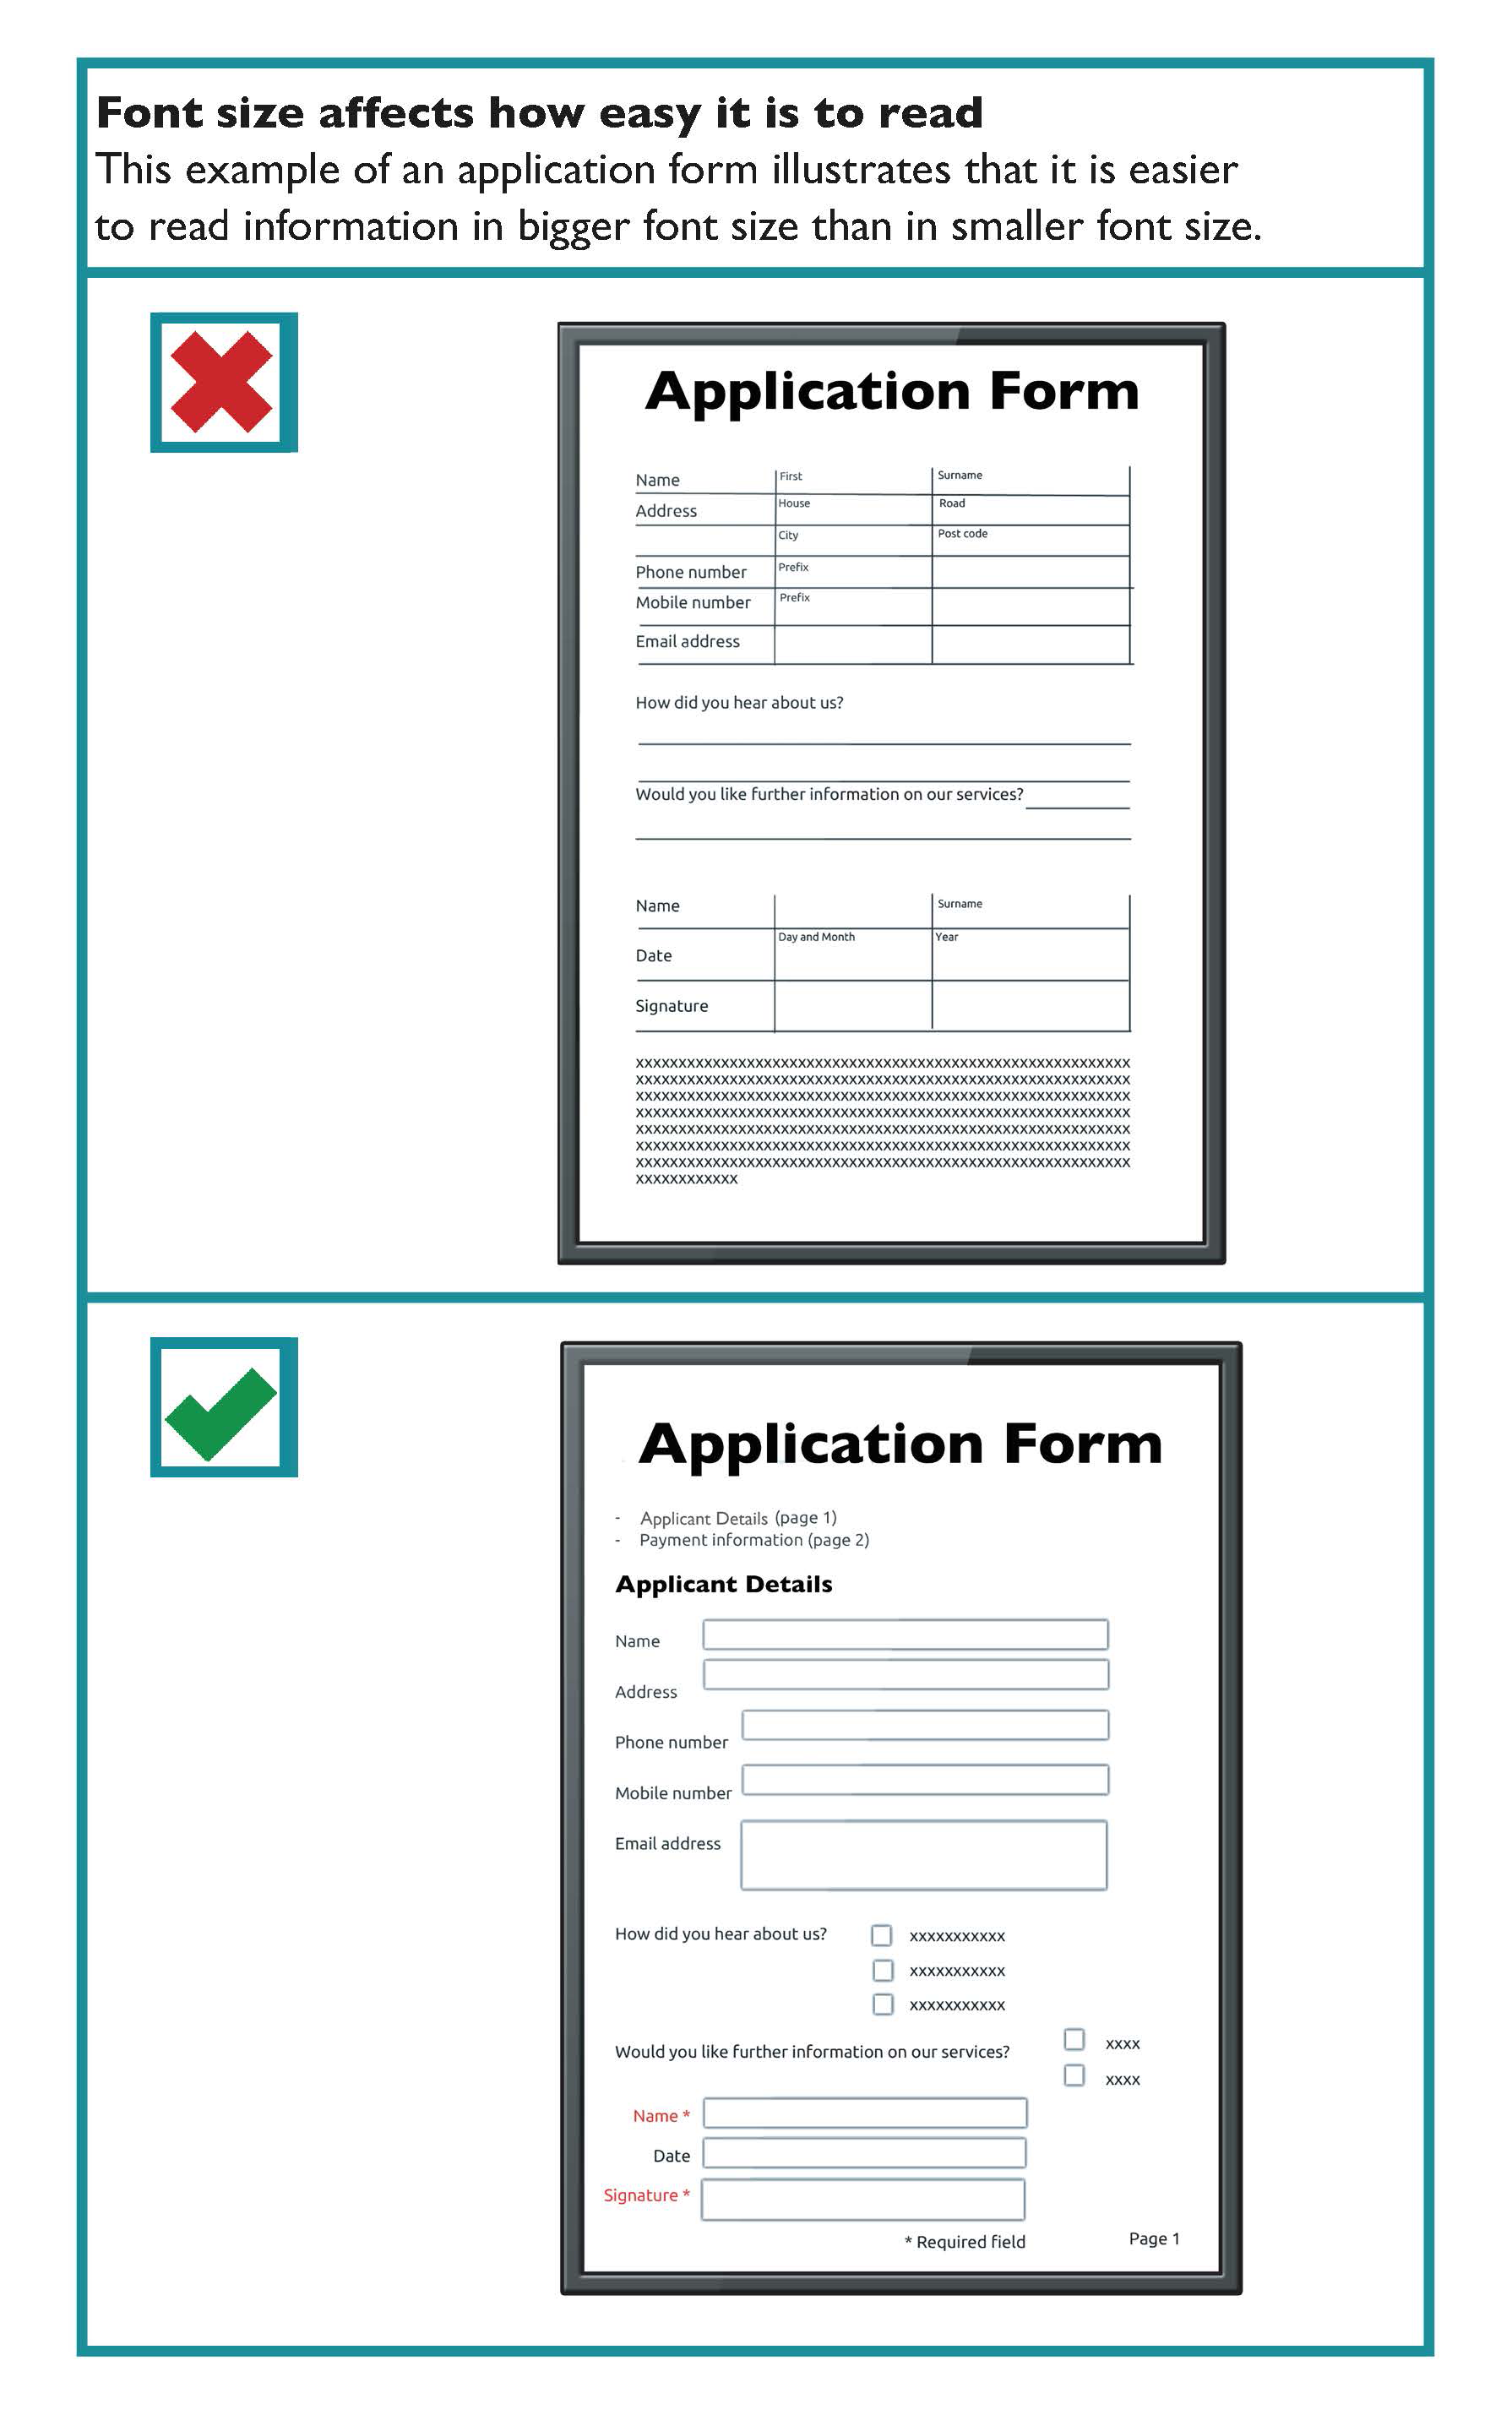 Example of a good and bad designed application form